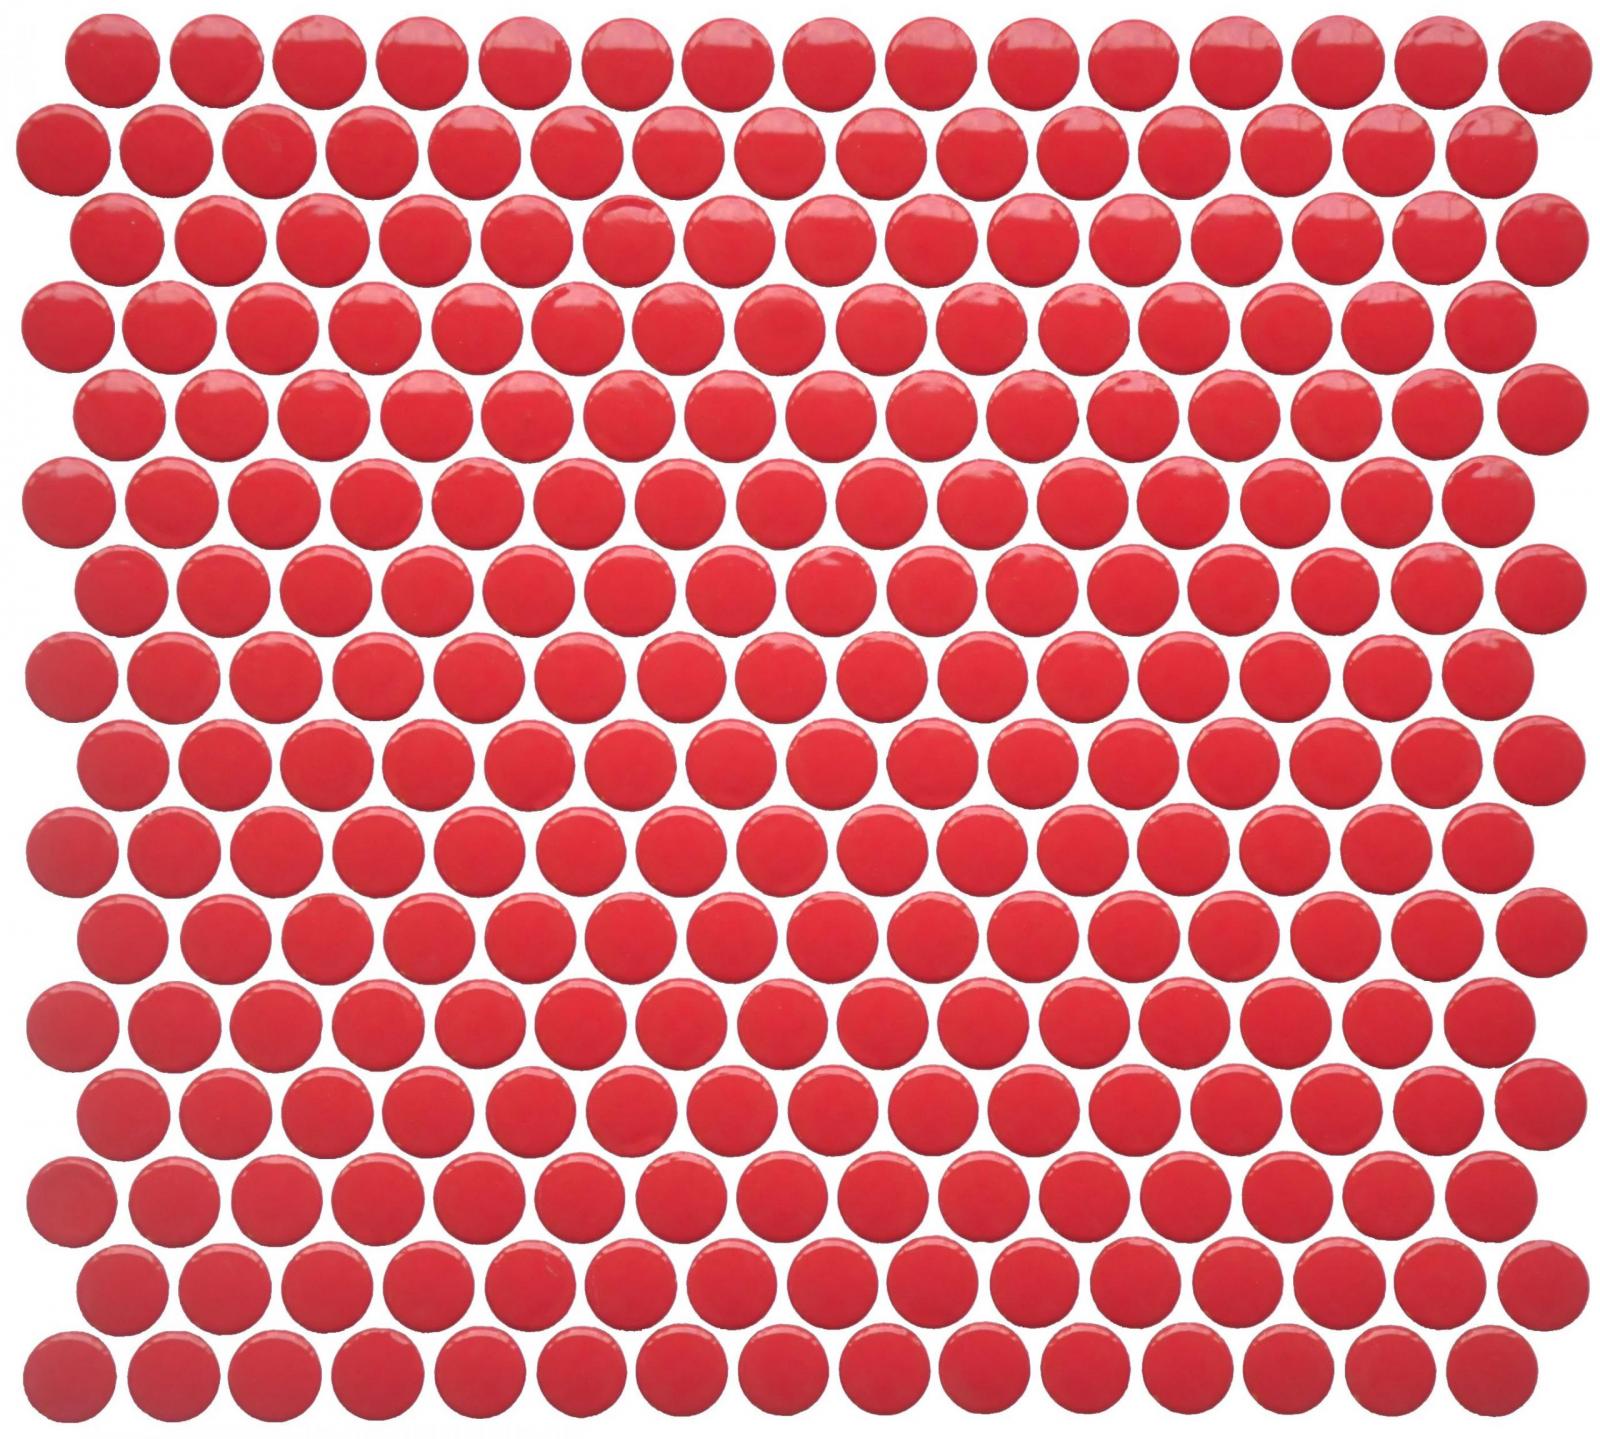 BG RED PEPPER PENNY ROUND MOS 12X12